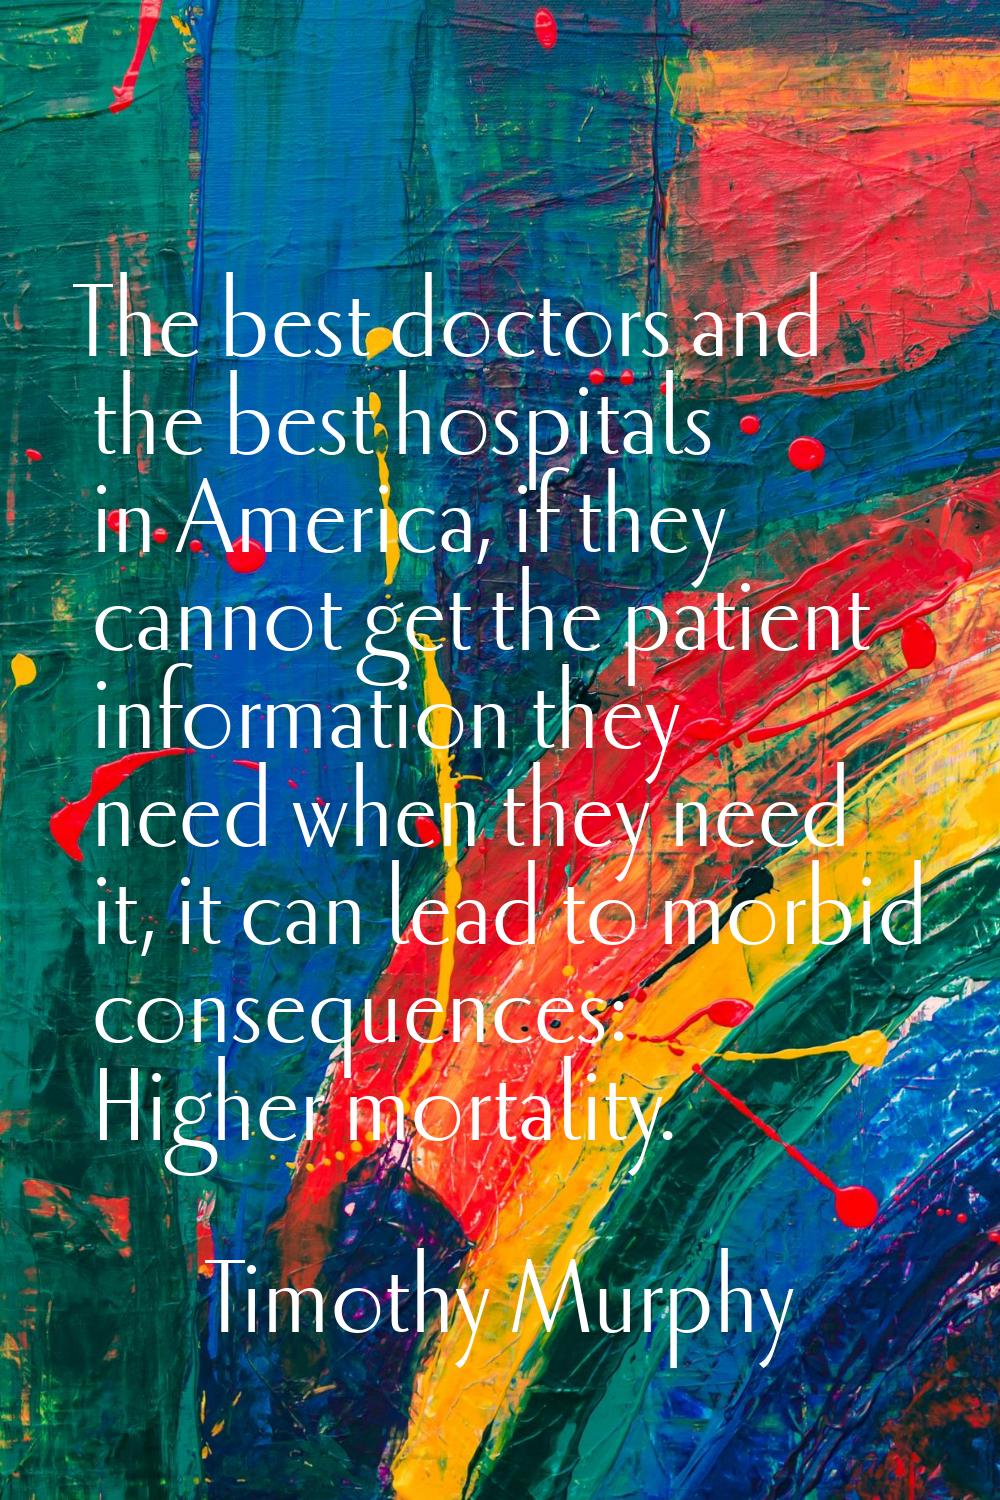 The best doctors and the best hospitals in America, if they cannot get the patient information they